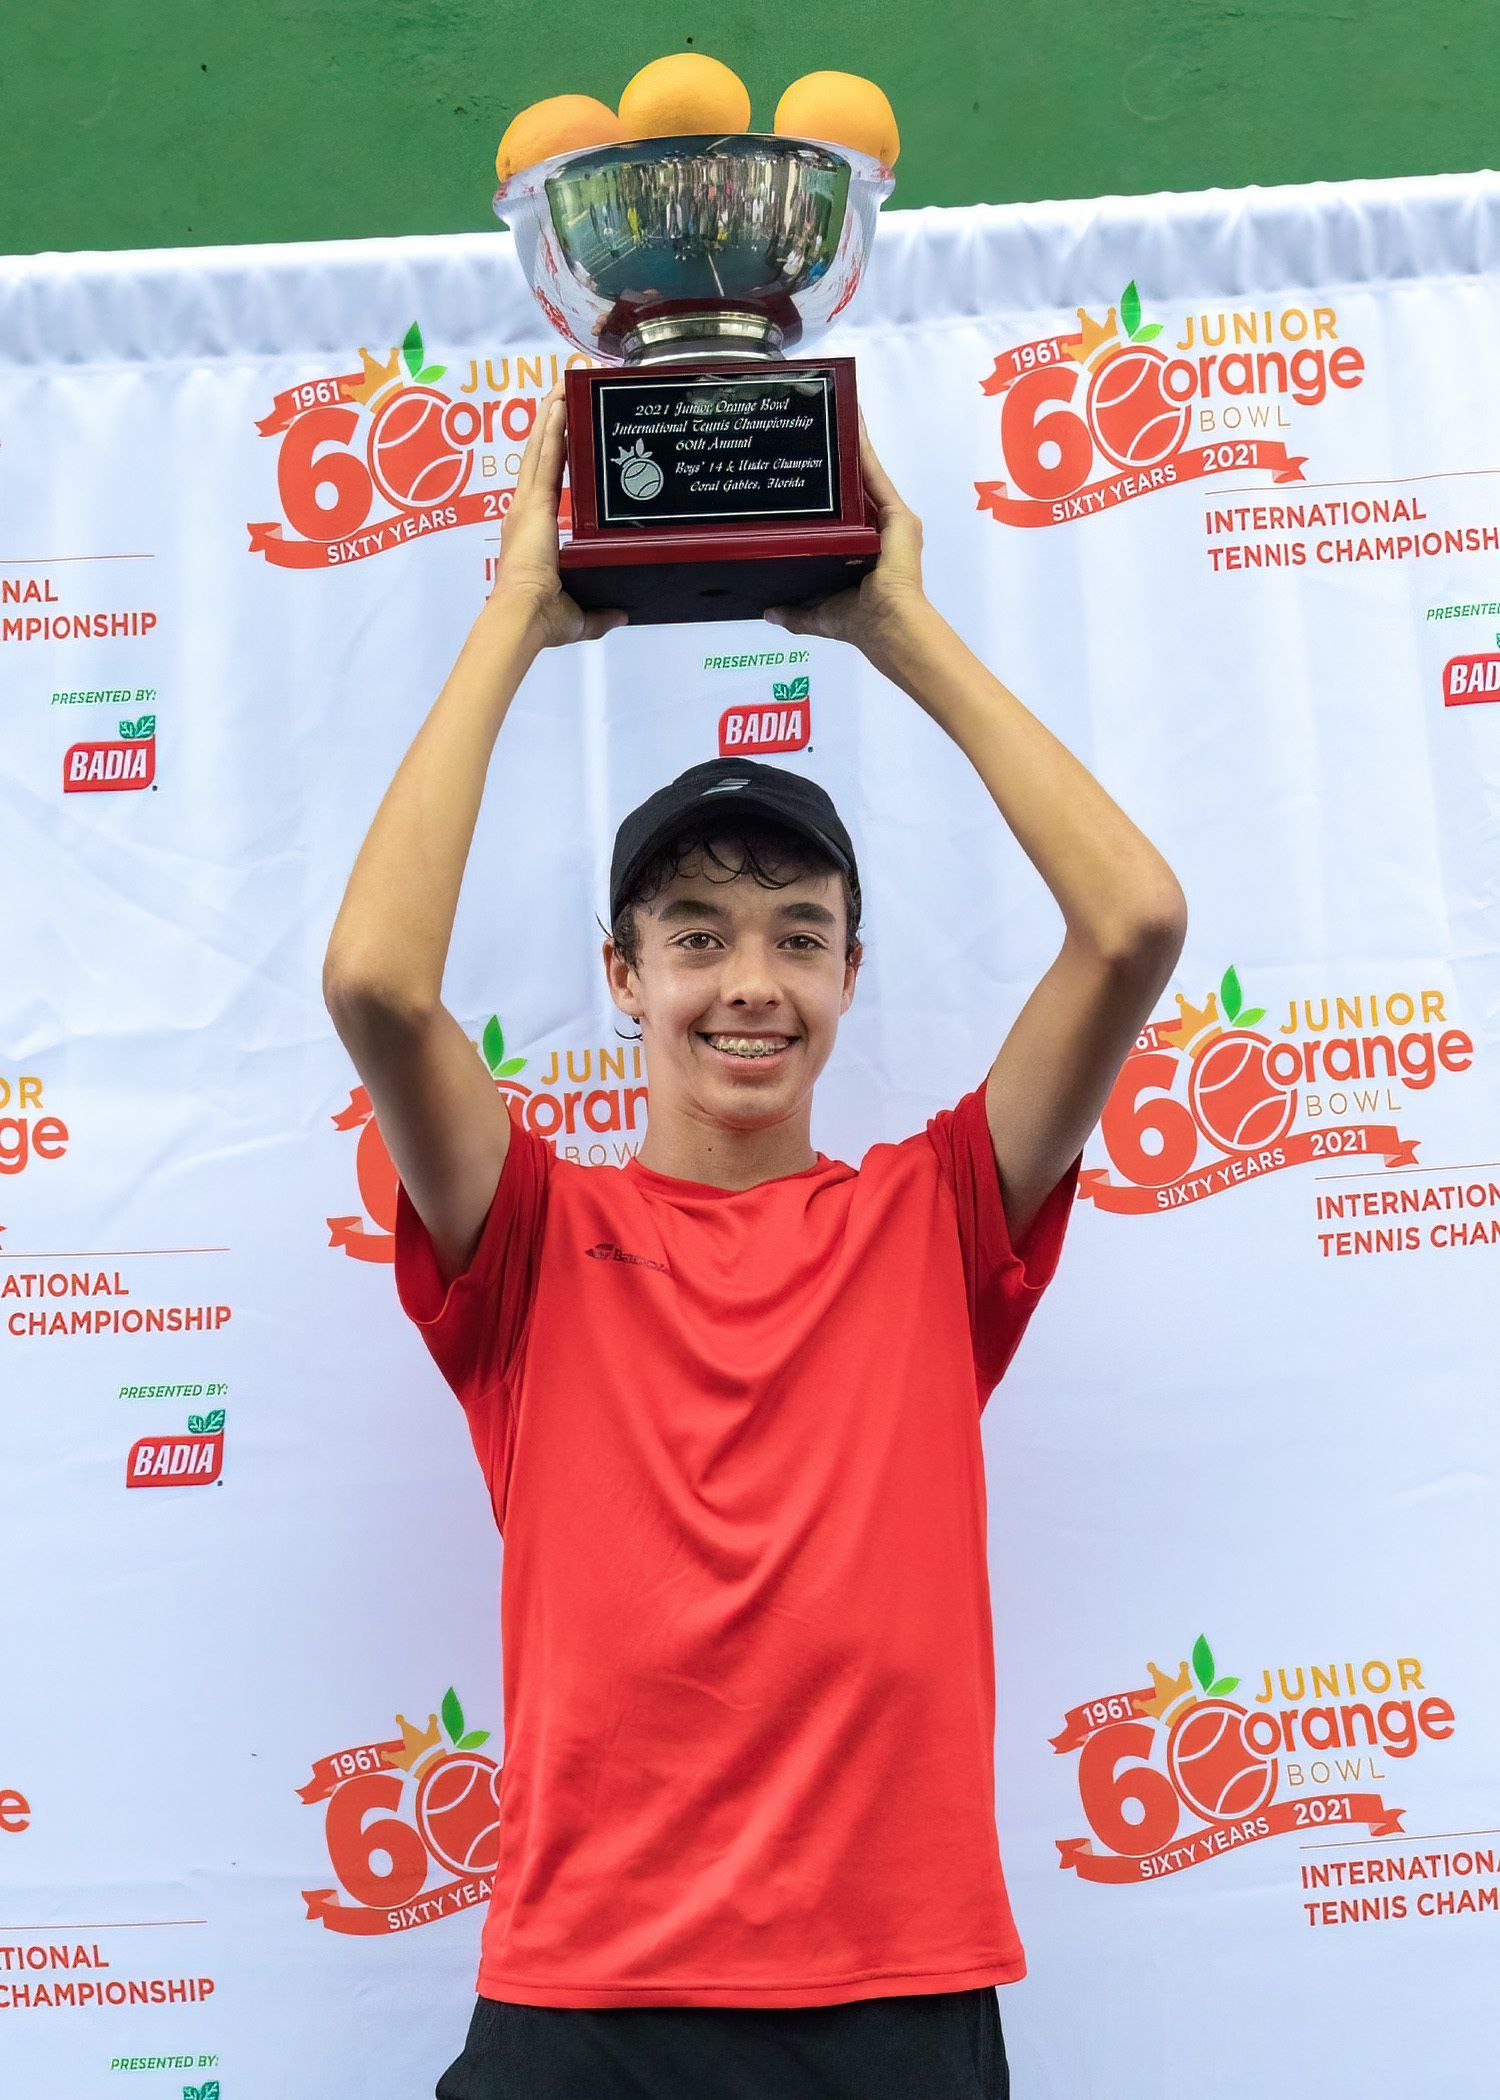 Alejandro Arcila is first Colombian to win Boys' 14s in the Junior Orange Bowl with a 2-6, 7-6 (5), 3-0 victory over 3rd seeded Darwin Blanch